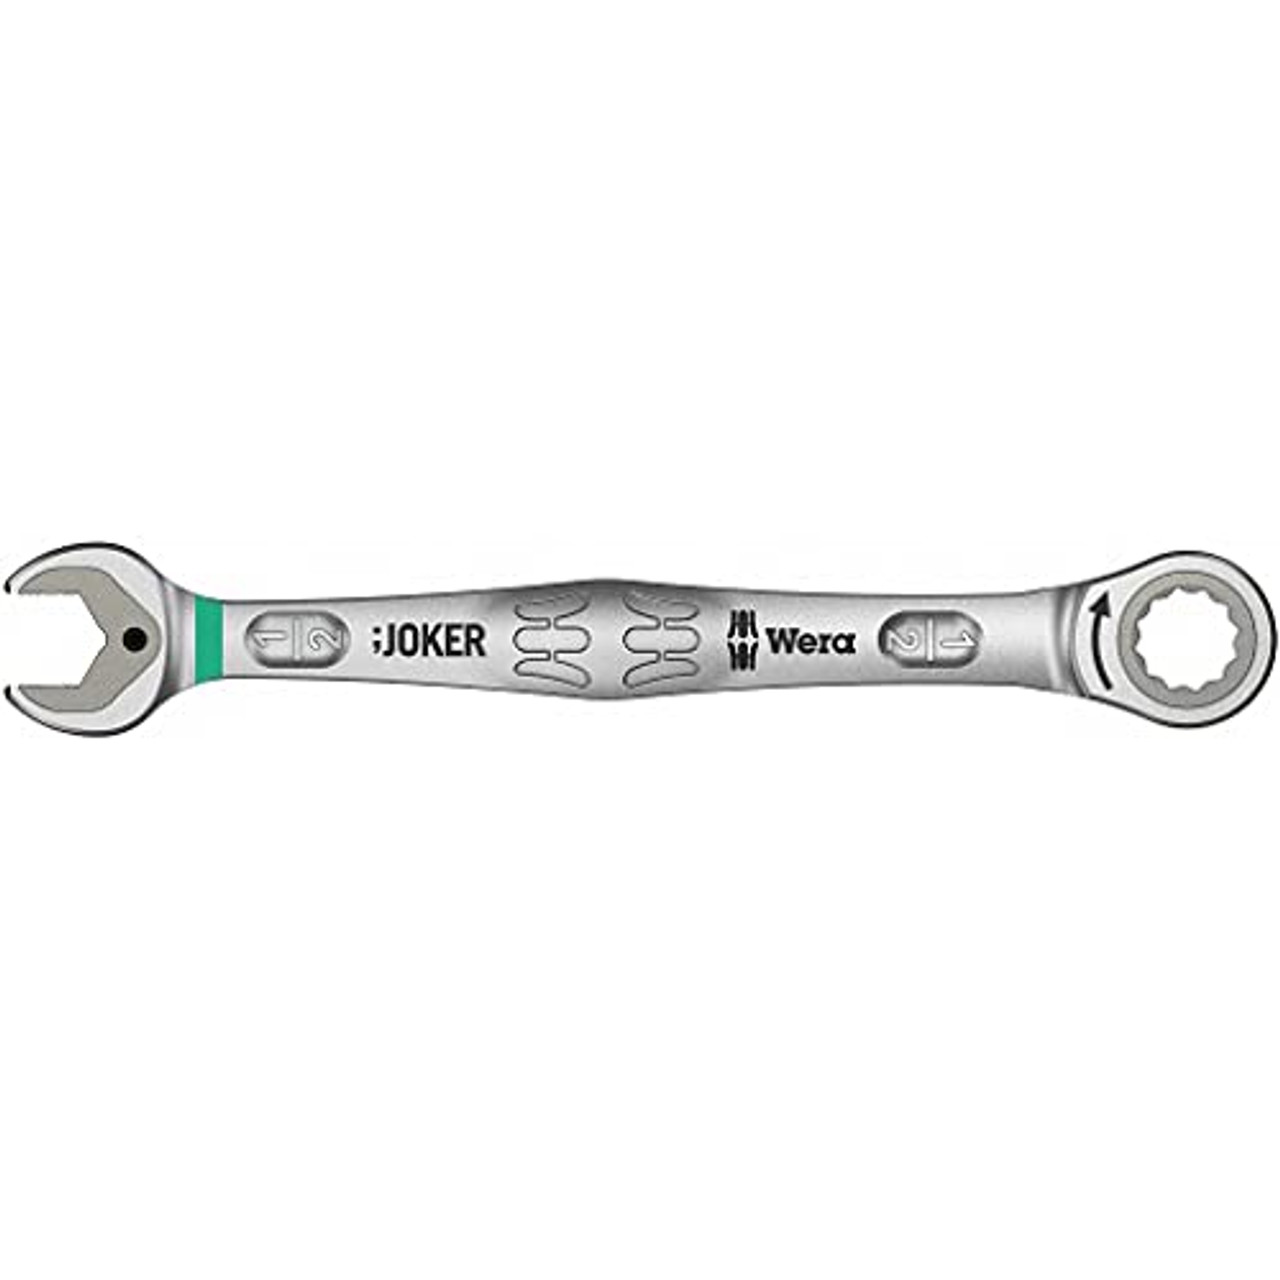 WERA 6000 Joker Ratcheting combination wrench, Imperial 1/2"x177mm